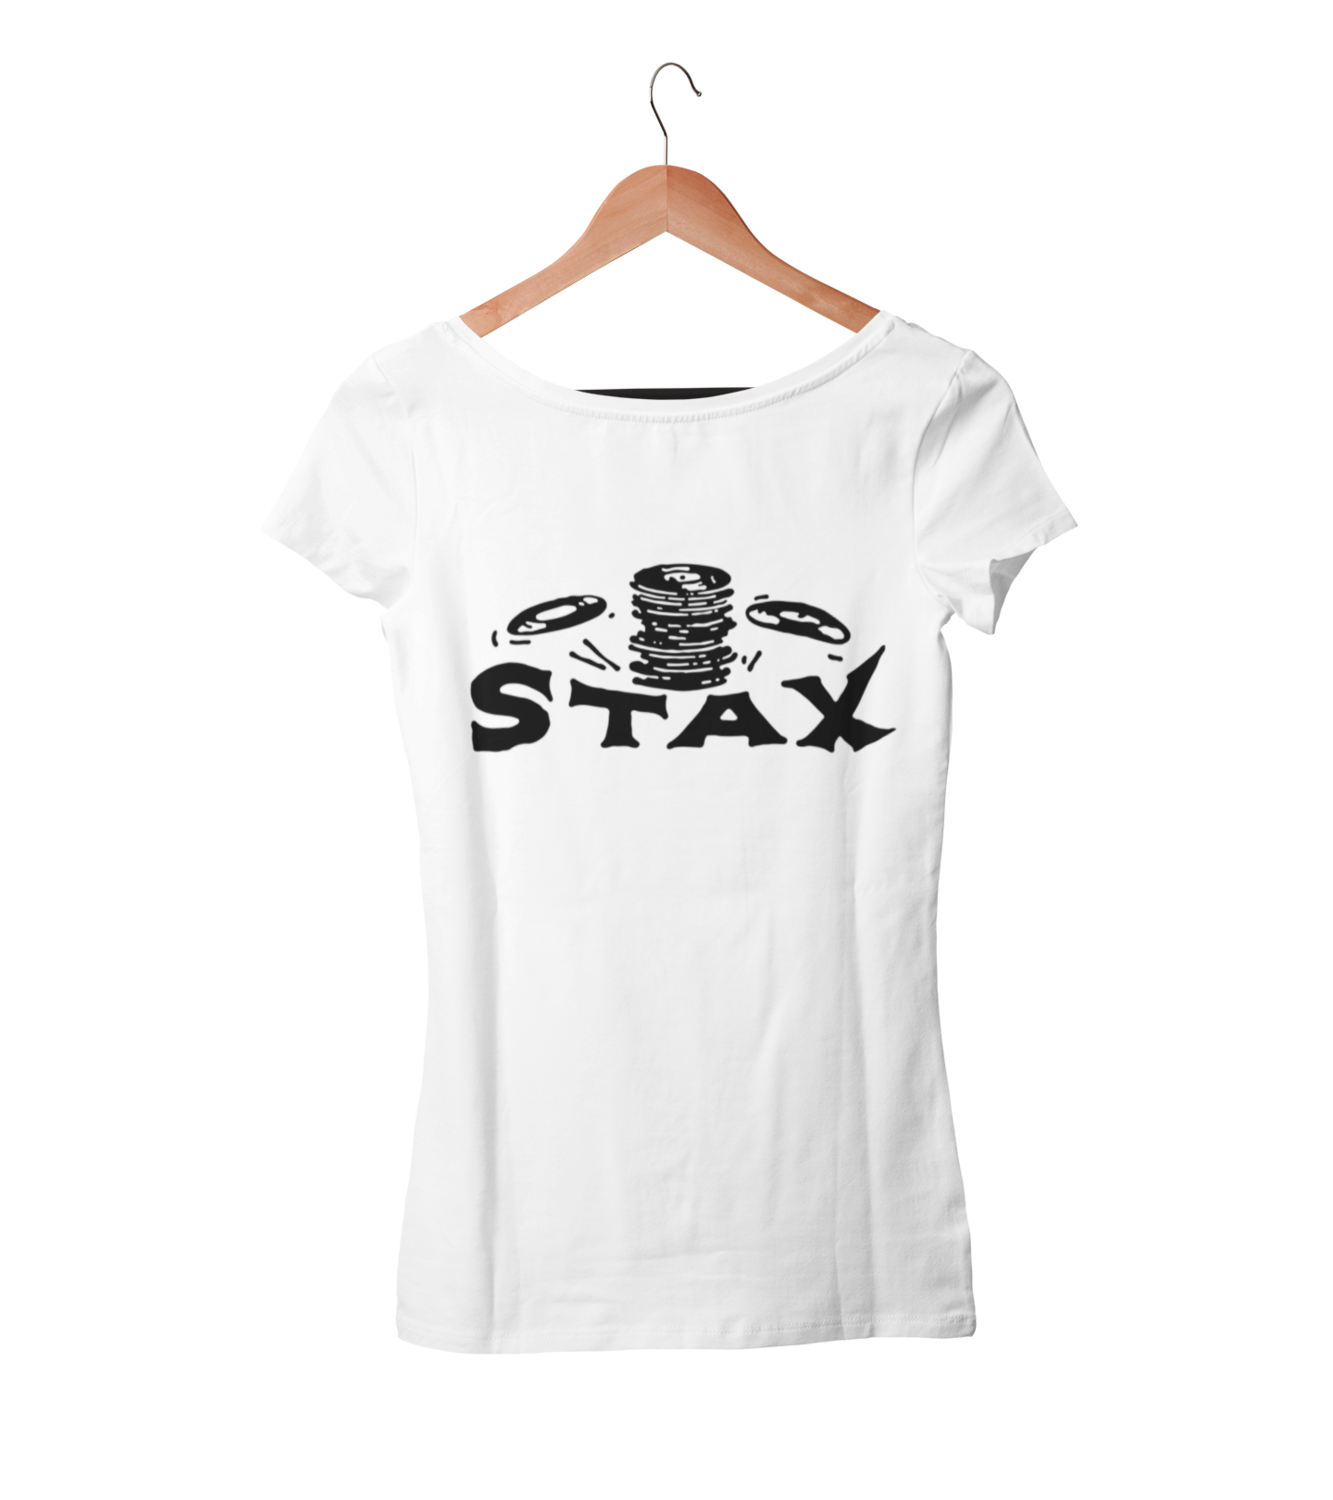 STAX RECORDS T-SHIRT WOMAN